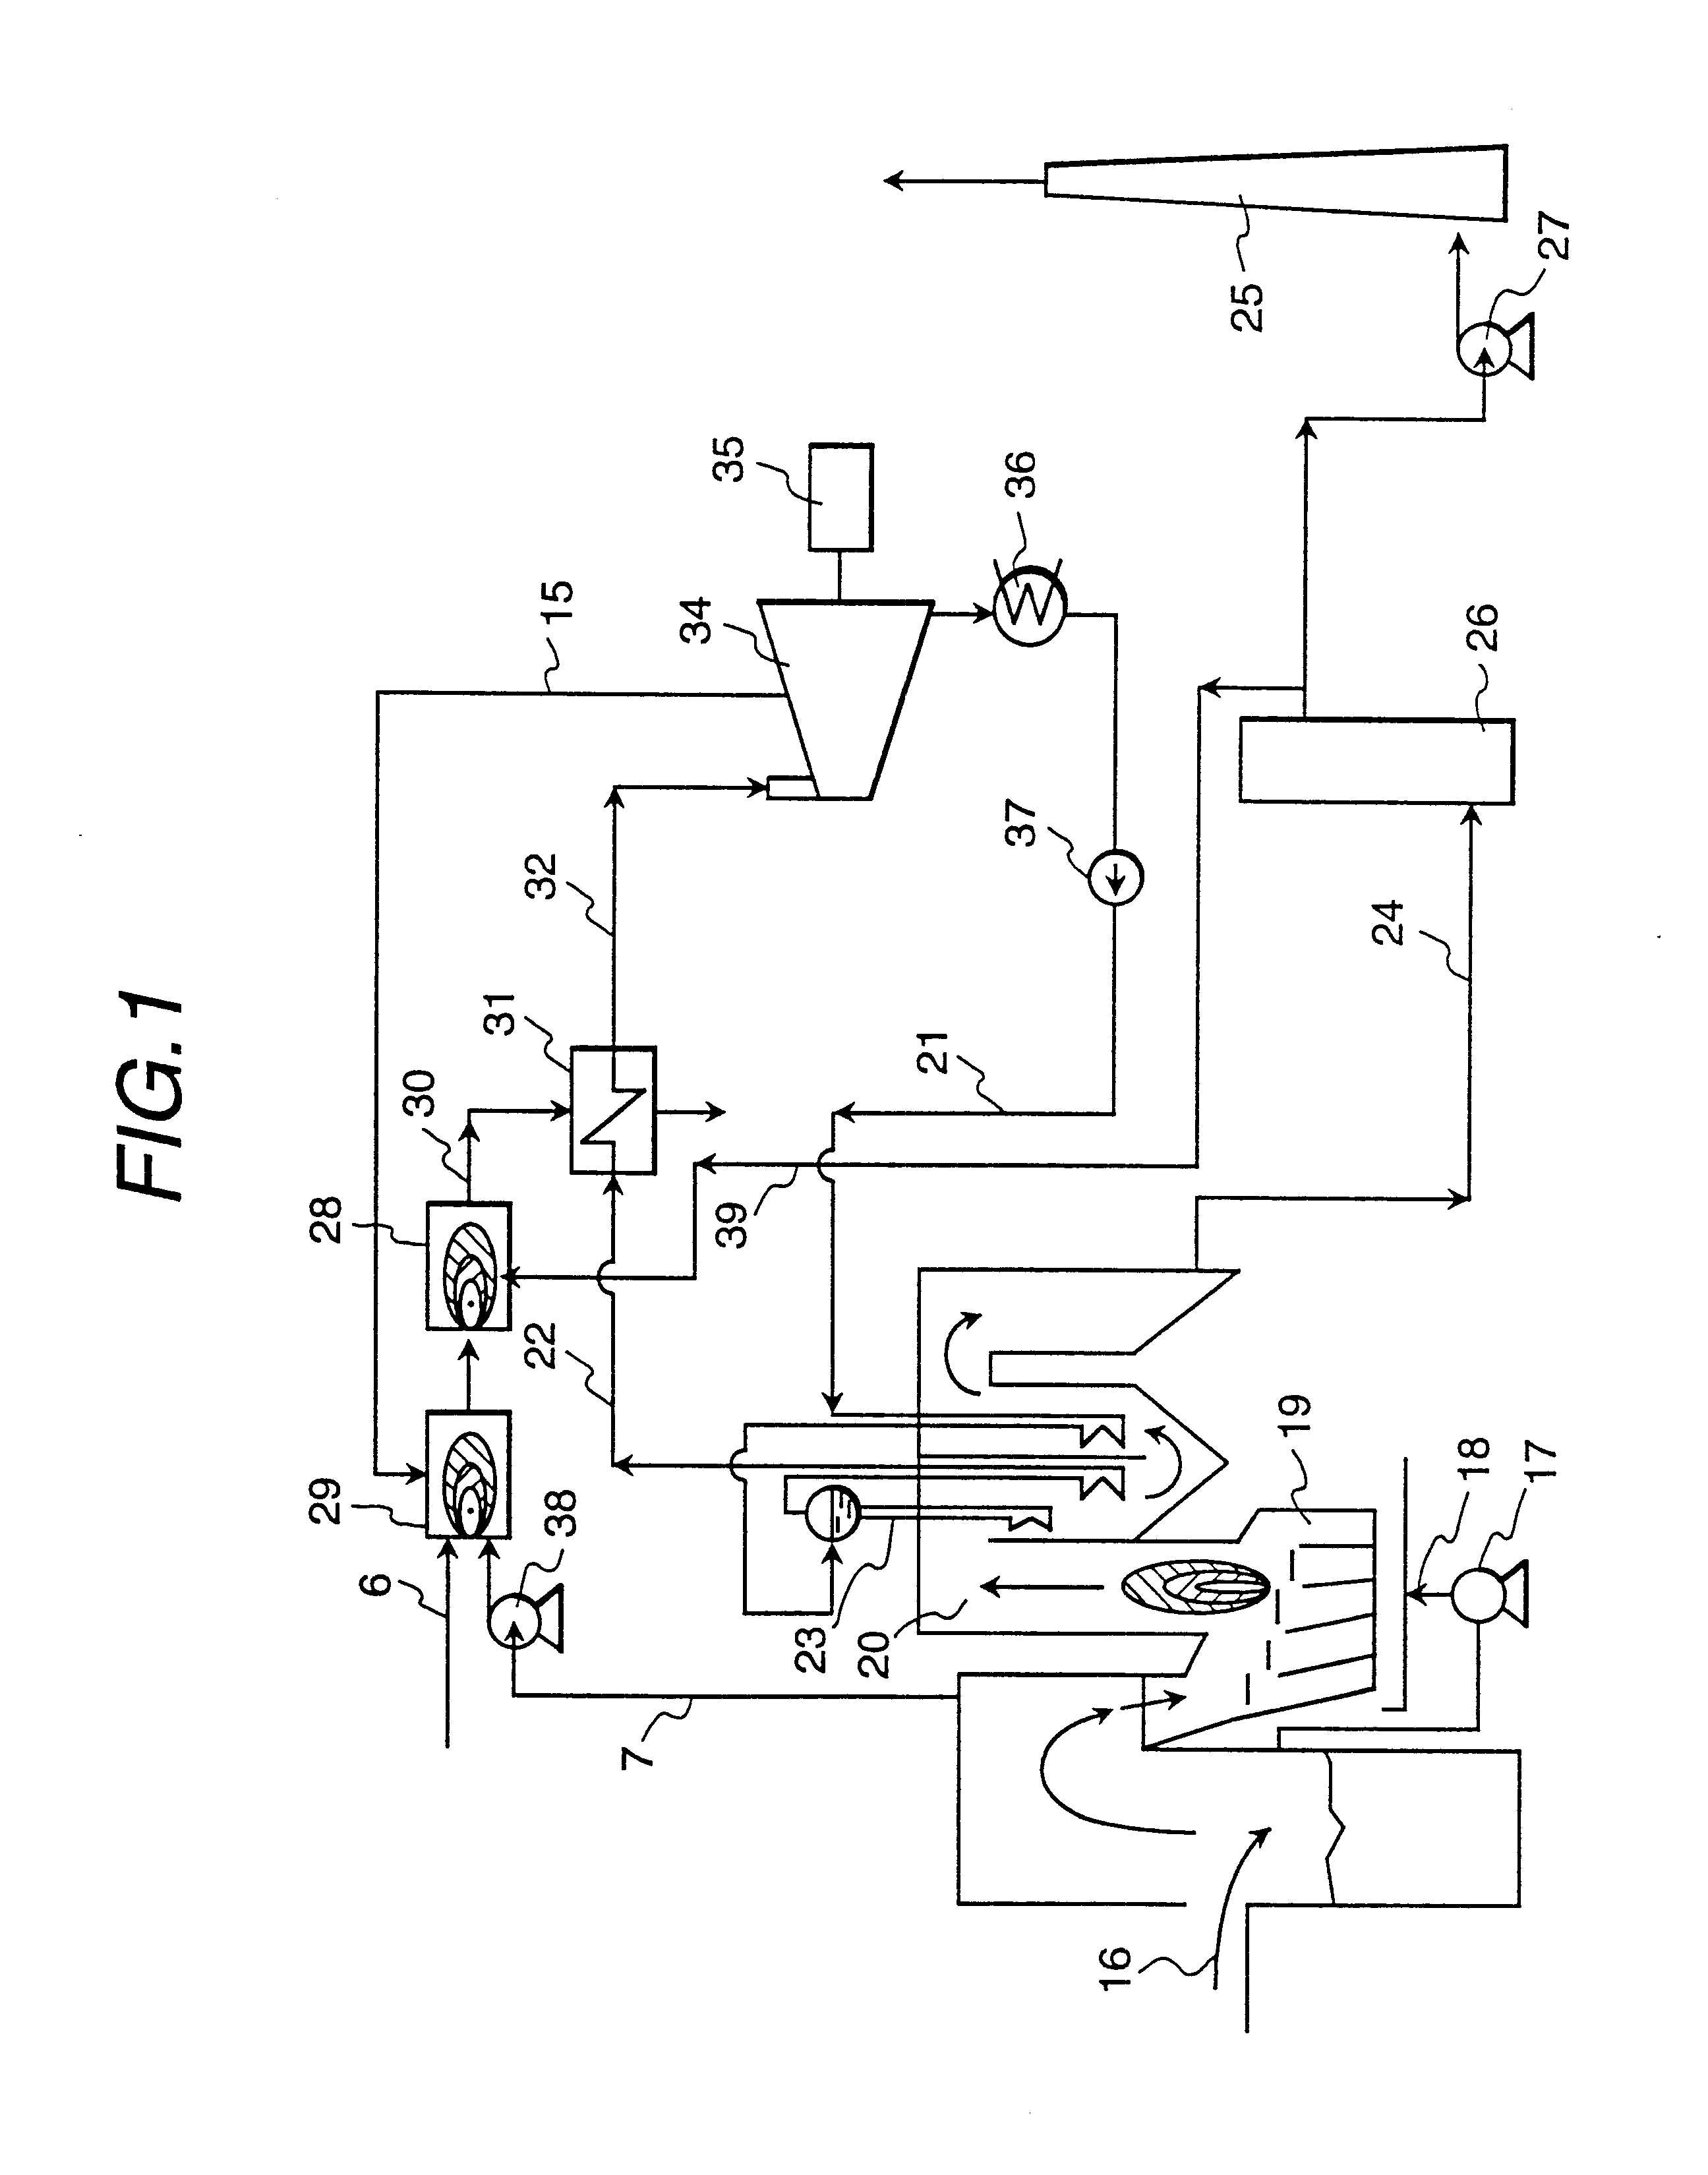 Waste processing system and fuel reformer used in the waste processing system